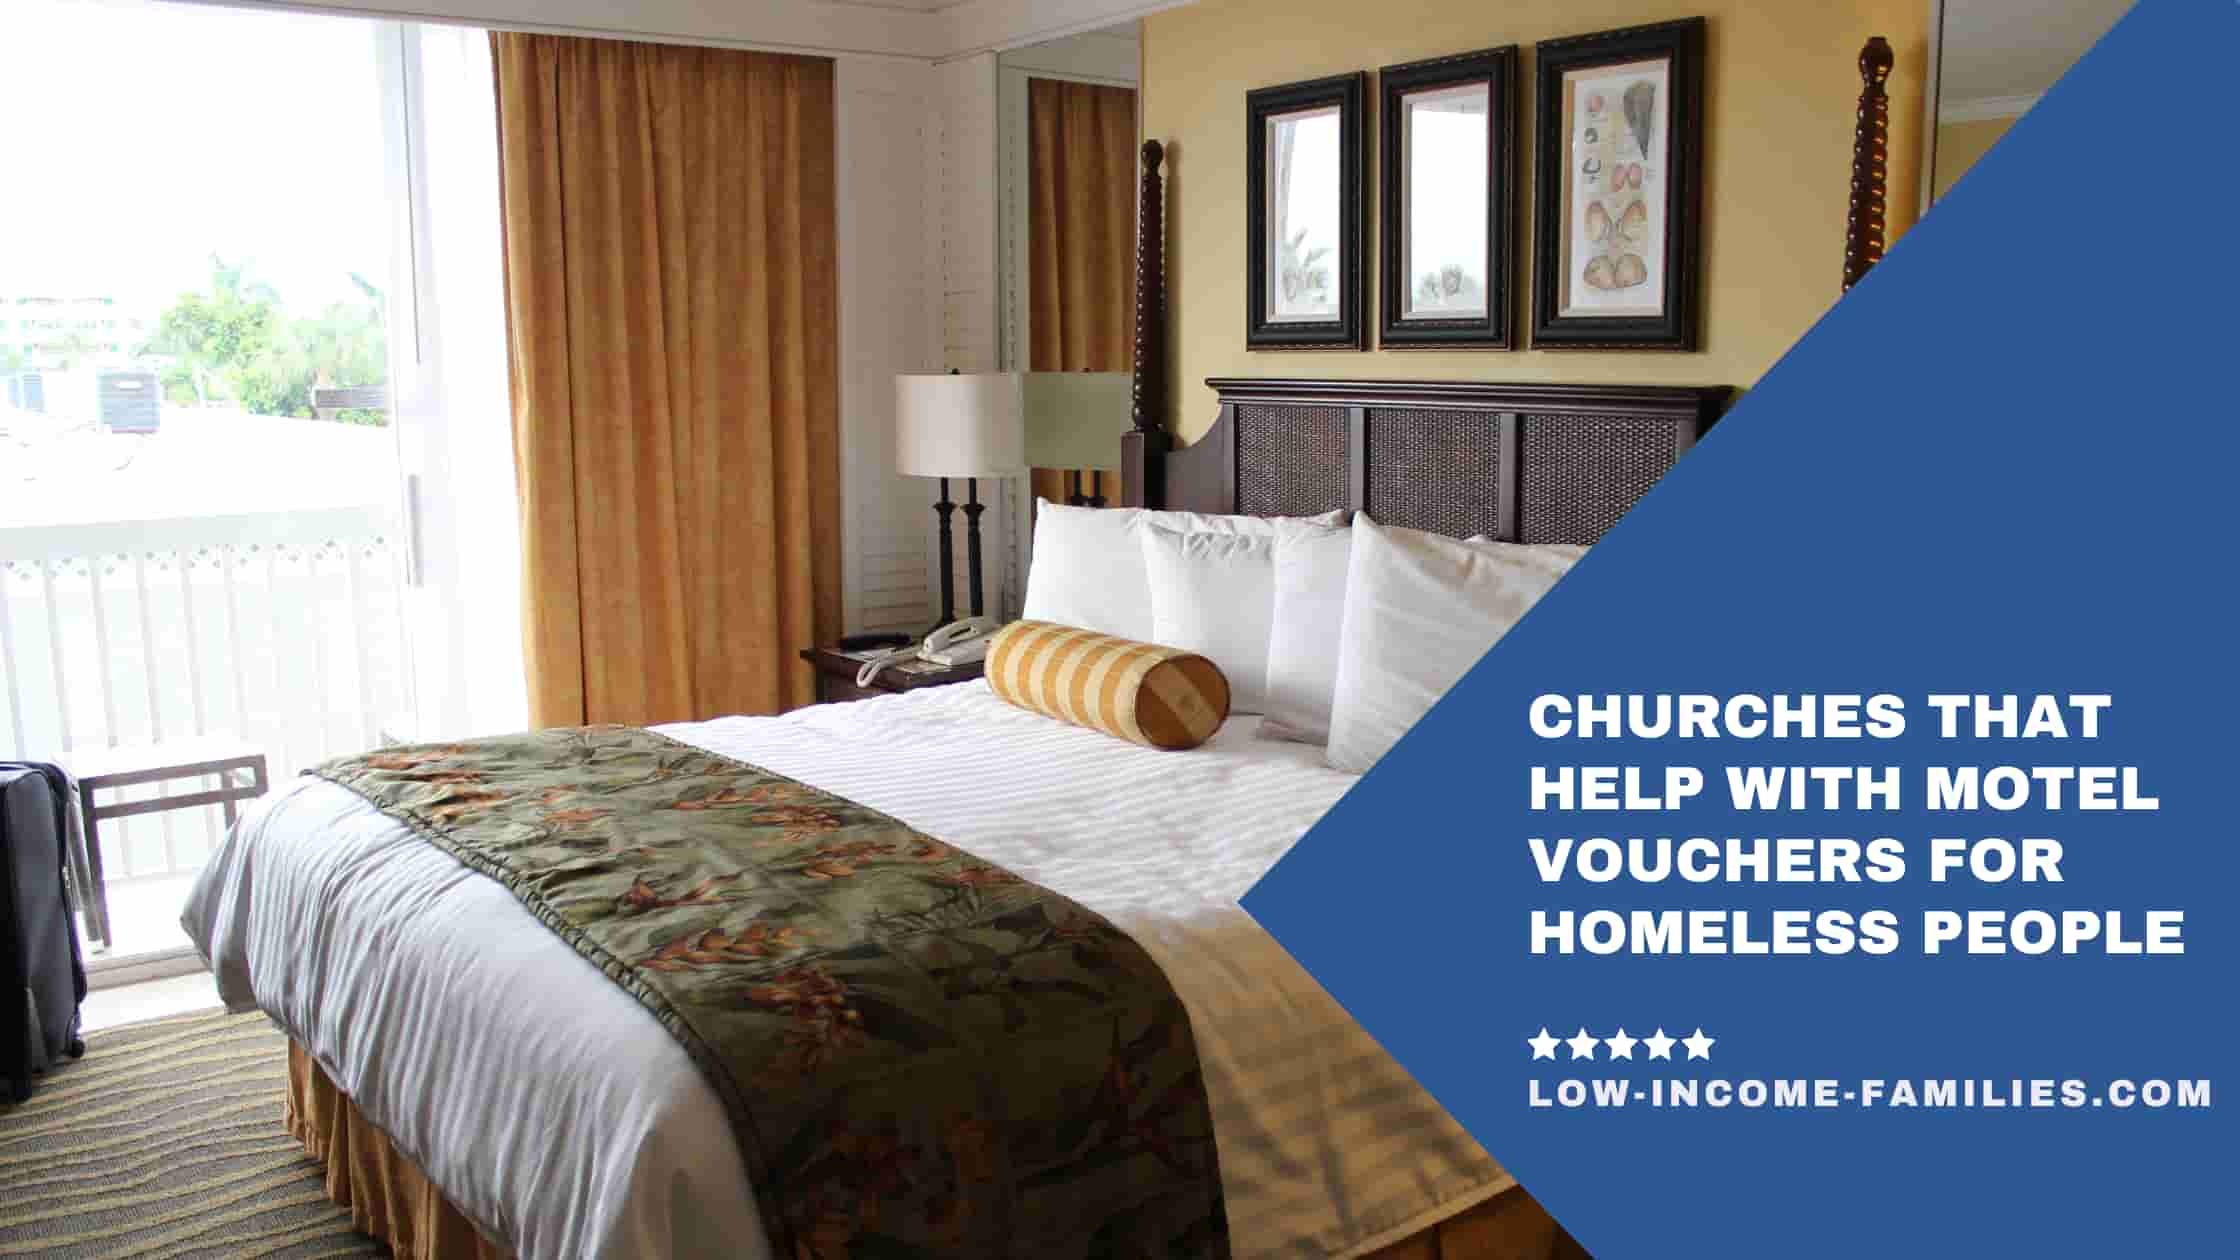 Churches That Help with Motel Vouchers for Homeless People